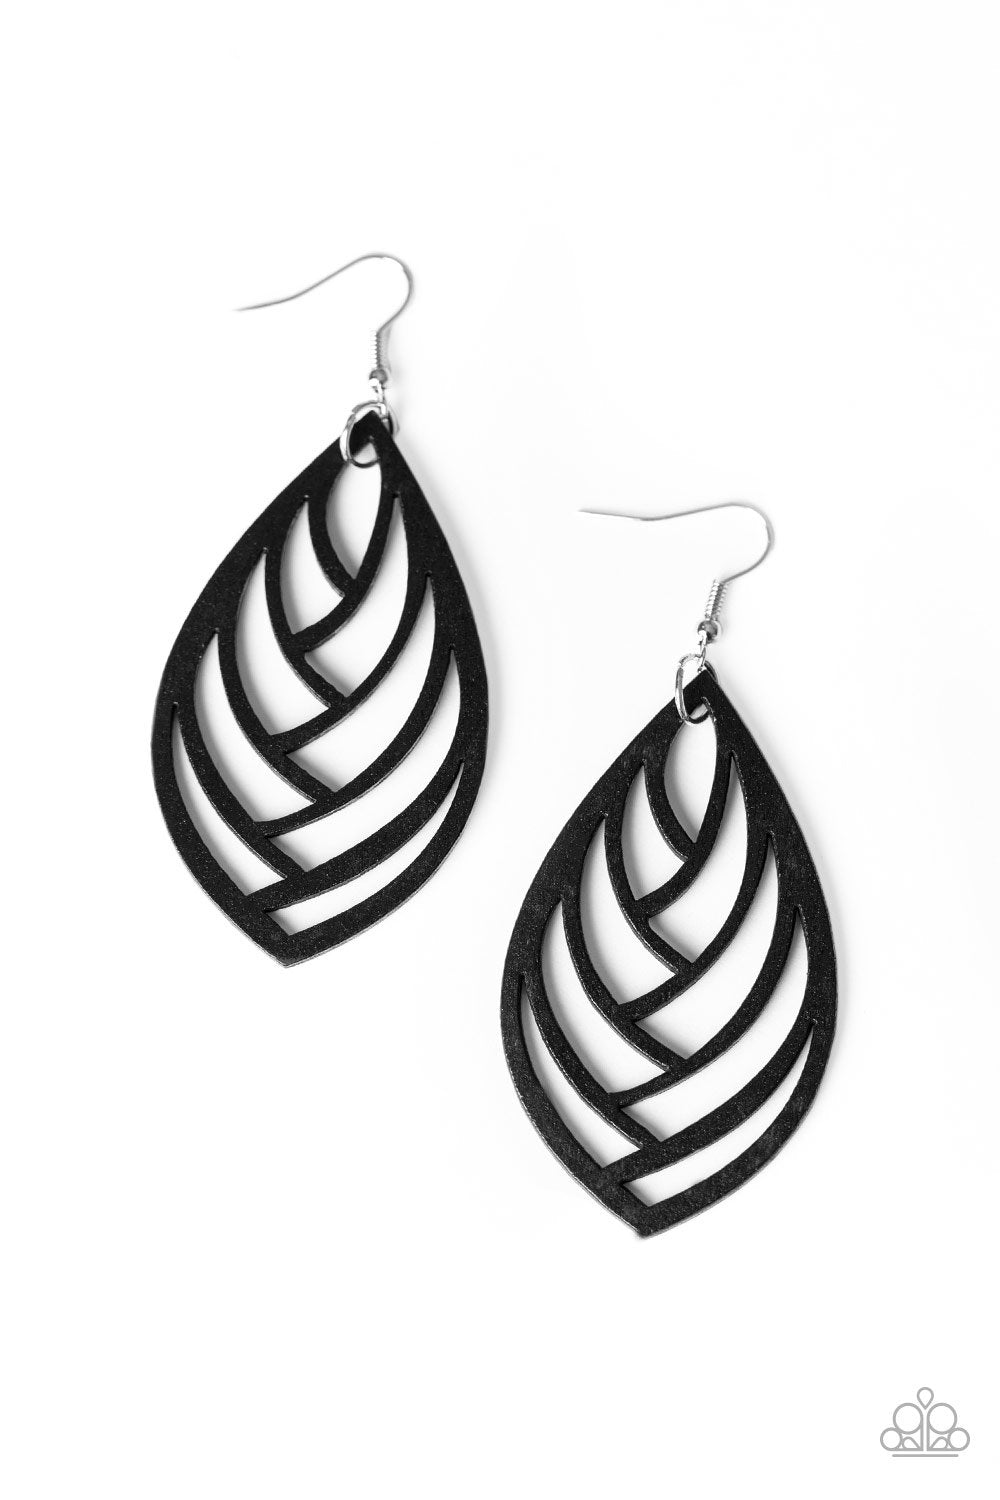 Out of the Woodwork Black Wood Leaf Earrings - Paparazzi Accessories-CarasShop.com - $5 Jewelry by Cara Jewels